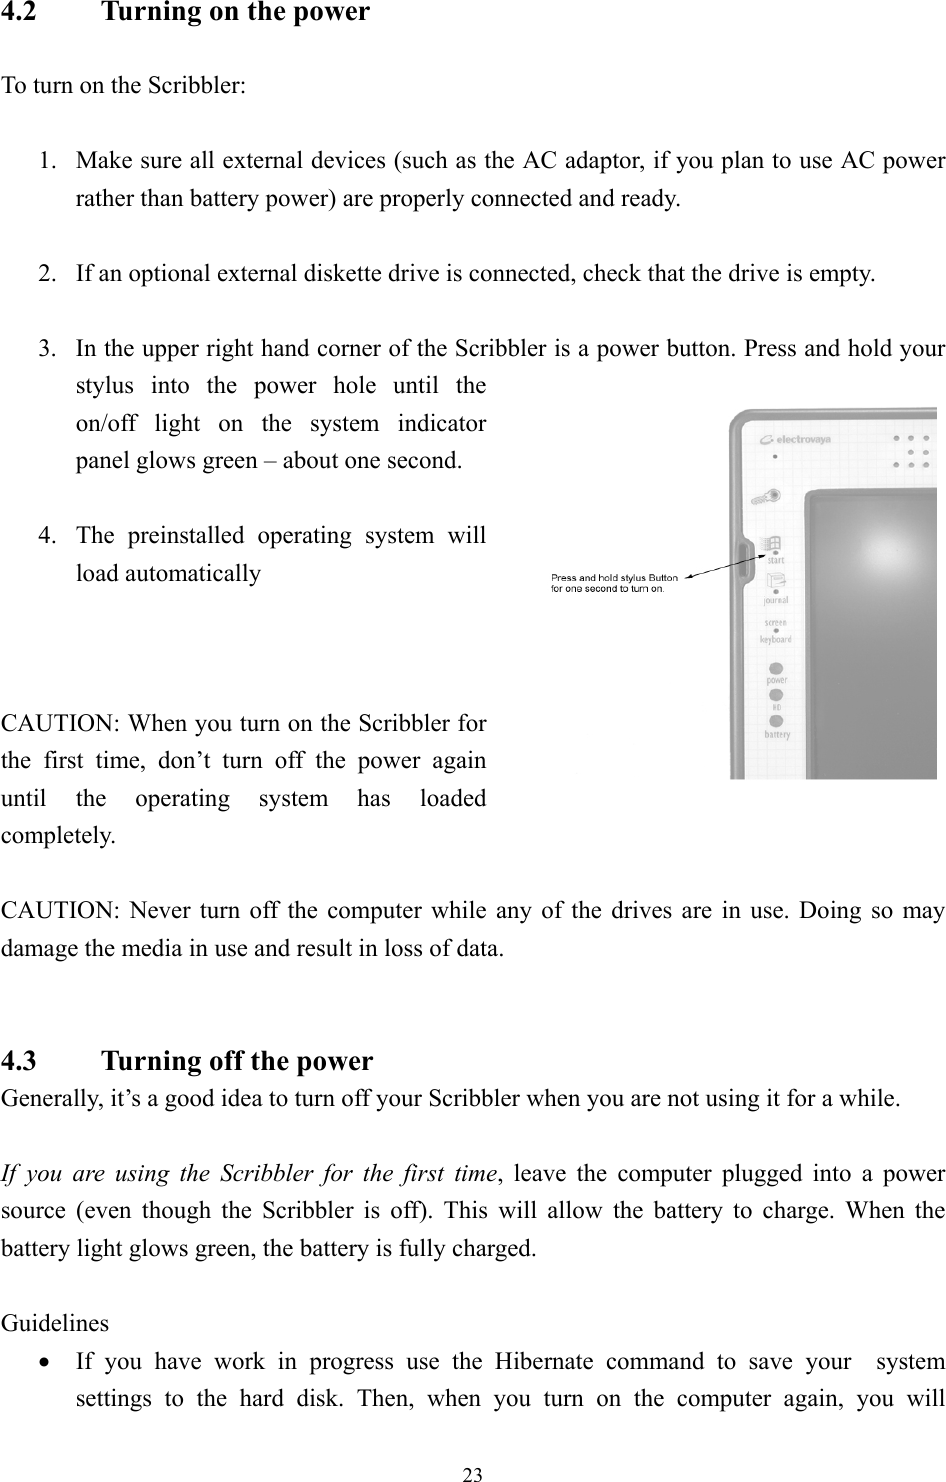 4.2    Turning on the power  To turn on the Scribbler:  1.  Make sure all external devices (such as the AC adaptor, if you plan to use AC power rather than battery power) are properly connected and ready.  2.  If an optional external diskette drive is connected, check that the drive is empty.  3.  In the upper right hand corner of the Scribbler is a power button. Press and hold your stylus into the power hole until the on/off light on the system indicator panel glows green – about one second.    4.  The preinstalled operating system will load automatically     CAUTION: When you turn on the Scribbler for the first time, don’t turn off the power again until the operating system has loaded completely.  CAUTION: Never turn off the computer while any of the drives are in use. Doing so may damage the media in use and result in loss of data.   4.3    Turning off the power Generally, it’s a good idea to turn off your Scribbler when you are not using it for a while.  If you are using the Scribbler for the first time, leave the computer plugged into a power source (even though the Scribbler is off). This will allow the battery to charge. When the battery light glows green, the battery is fully charged.  Guidelines •  If you have work in progress use the Hibernate command to save your  system settings to the hard disk. Then, when you turn on the computer again, you will  23